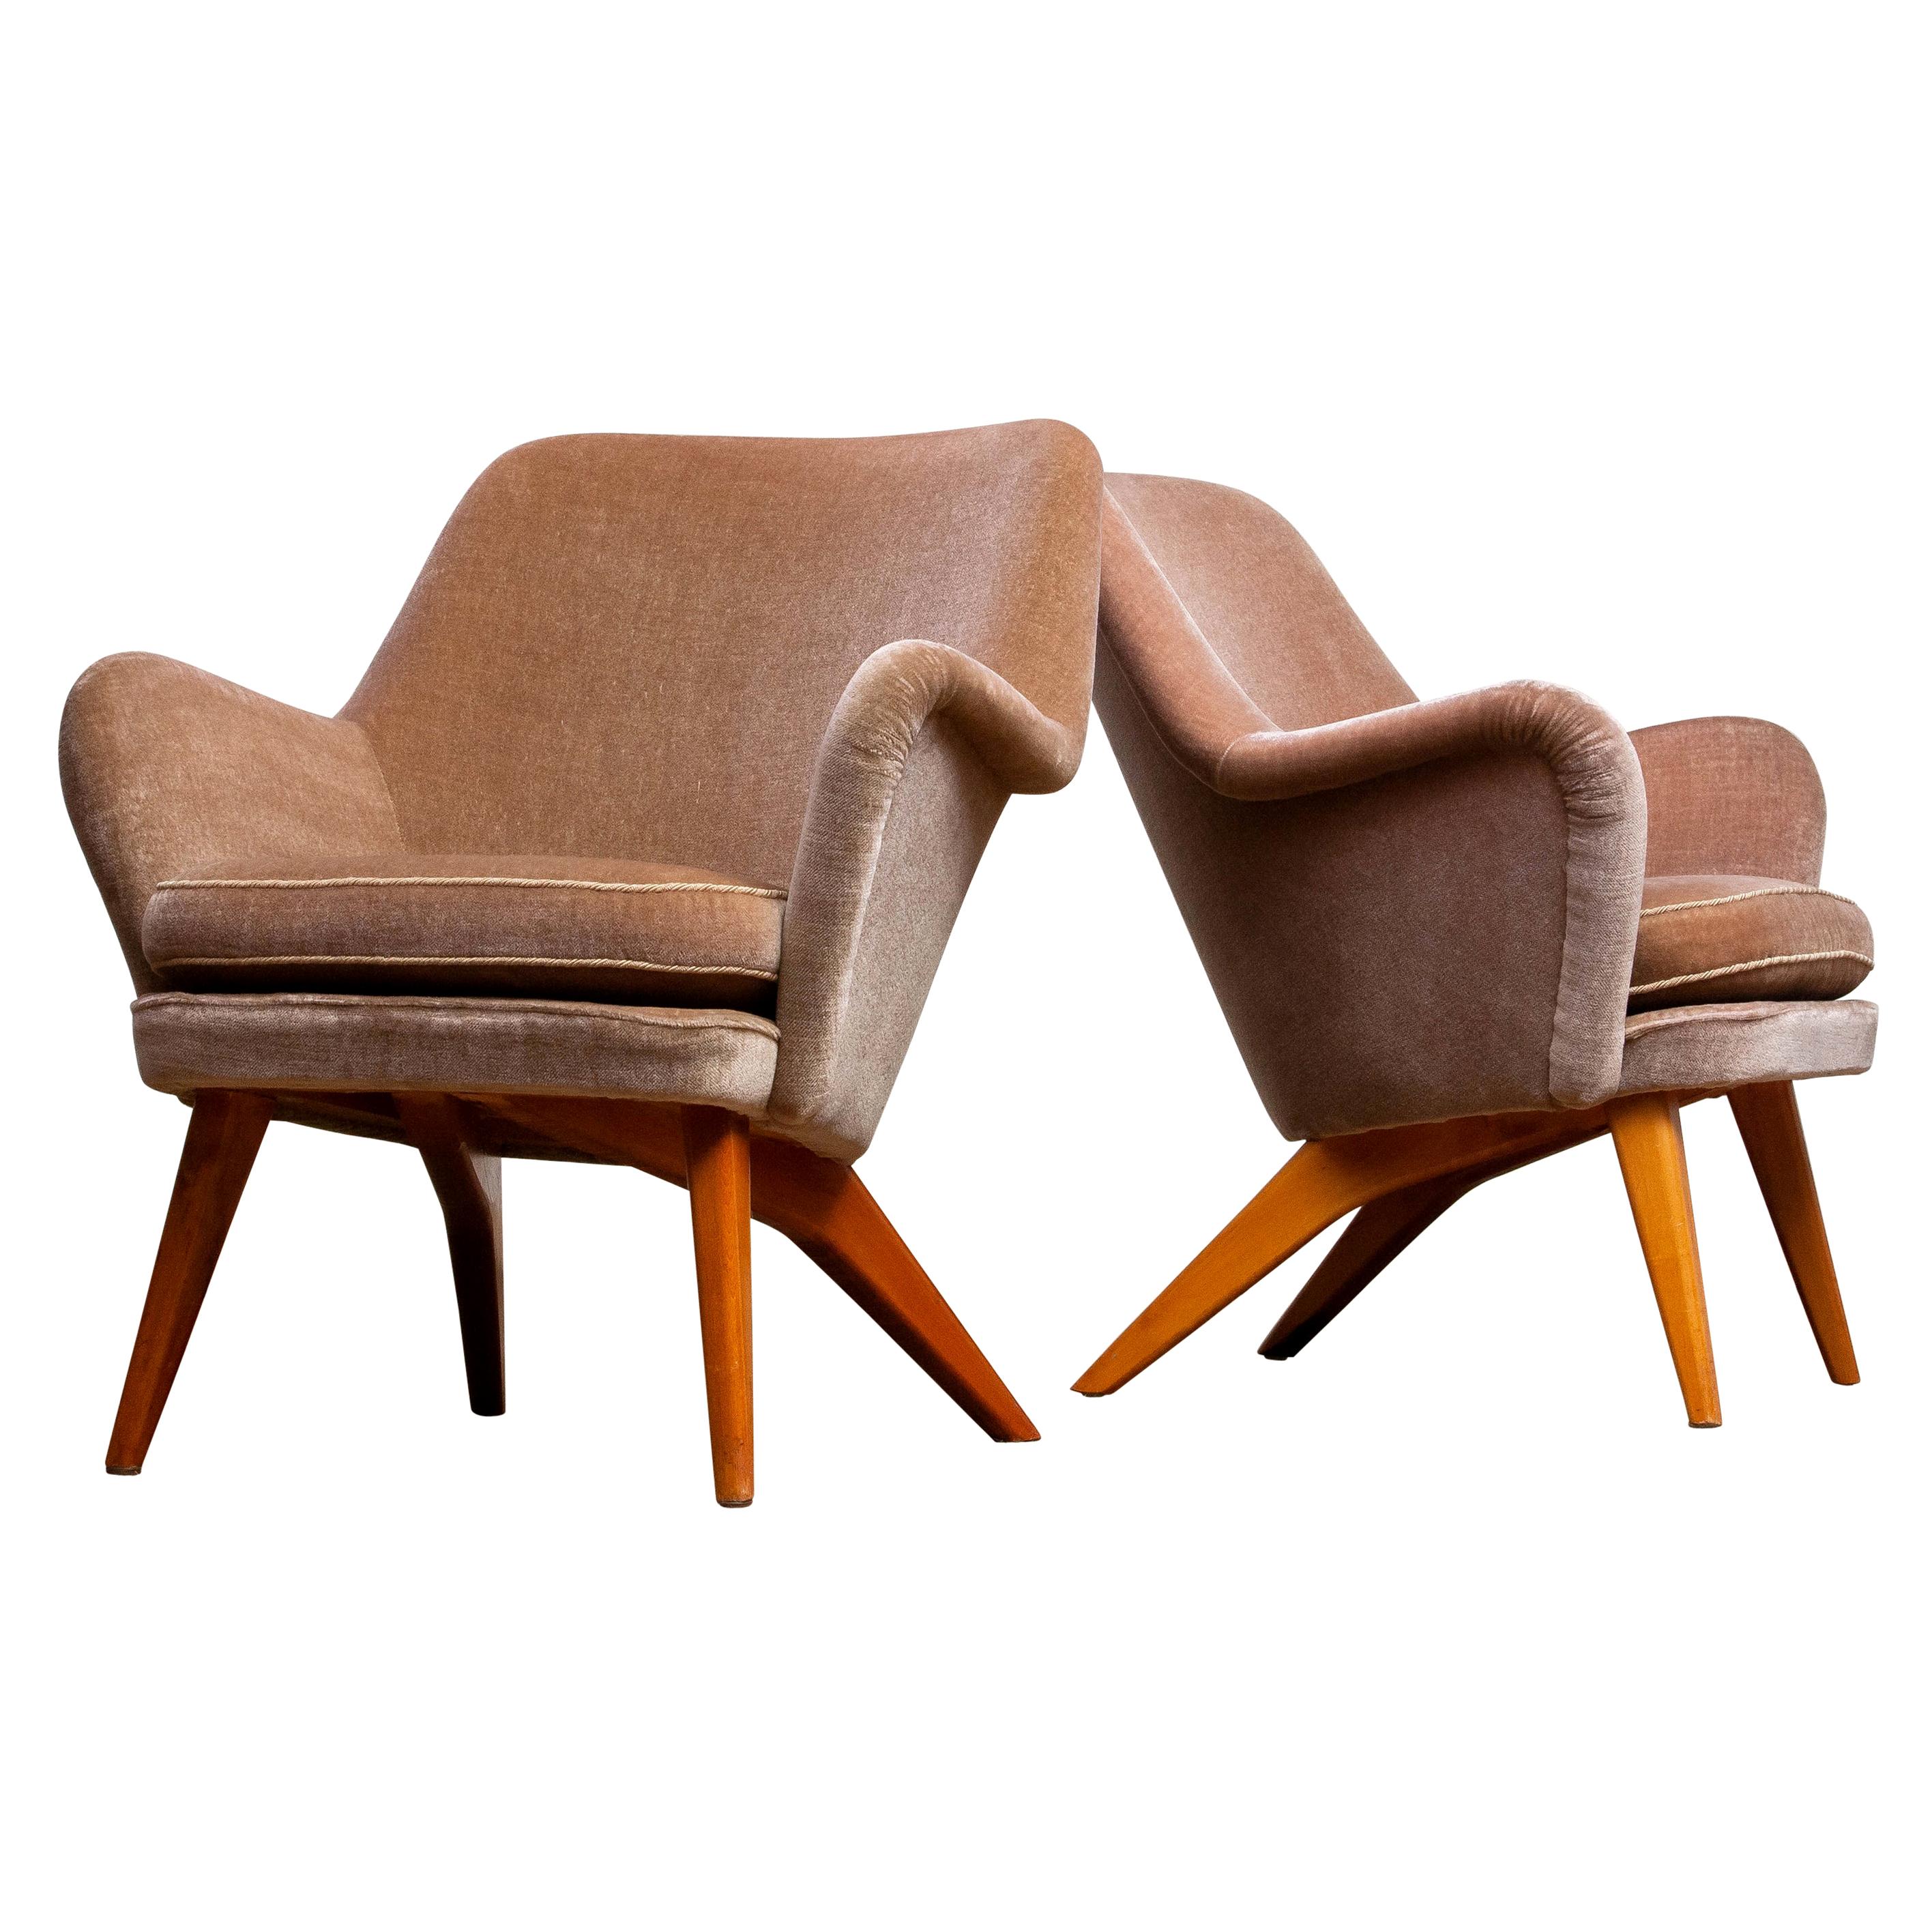 1950s Pair of Chairs by Carl Gustav Hiort af Ornäs for Puunveisto Oy-Trasnideri 6